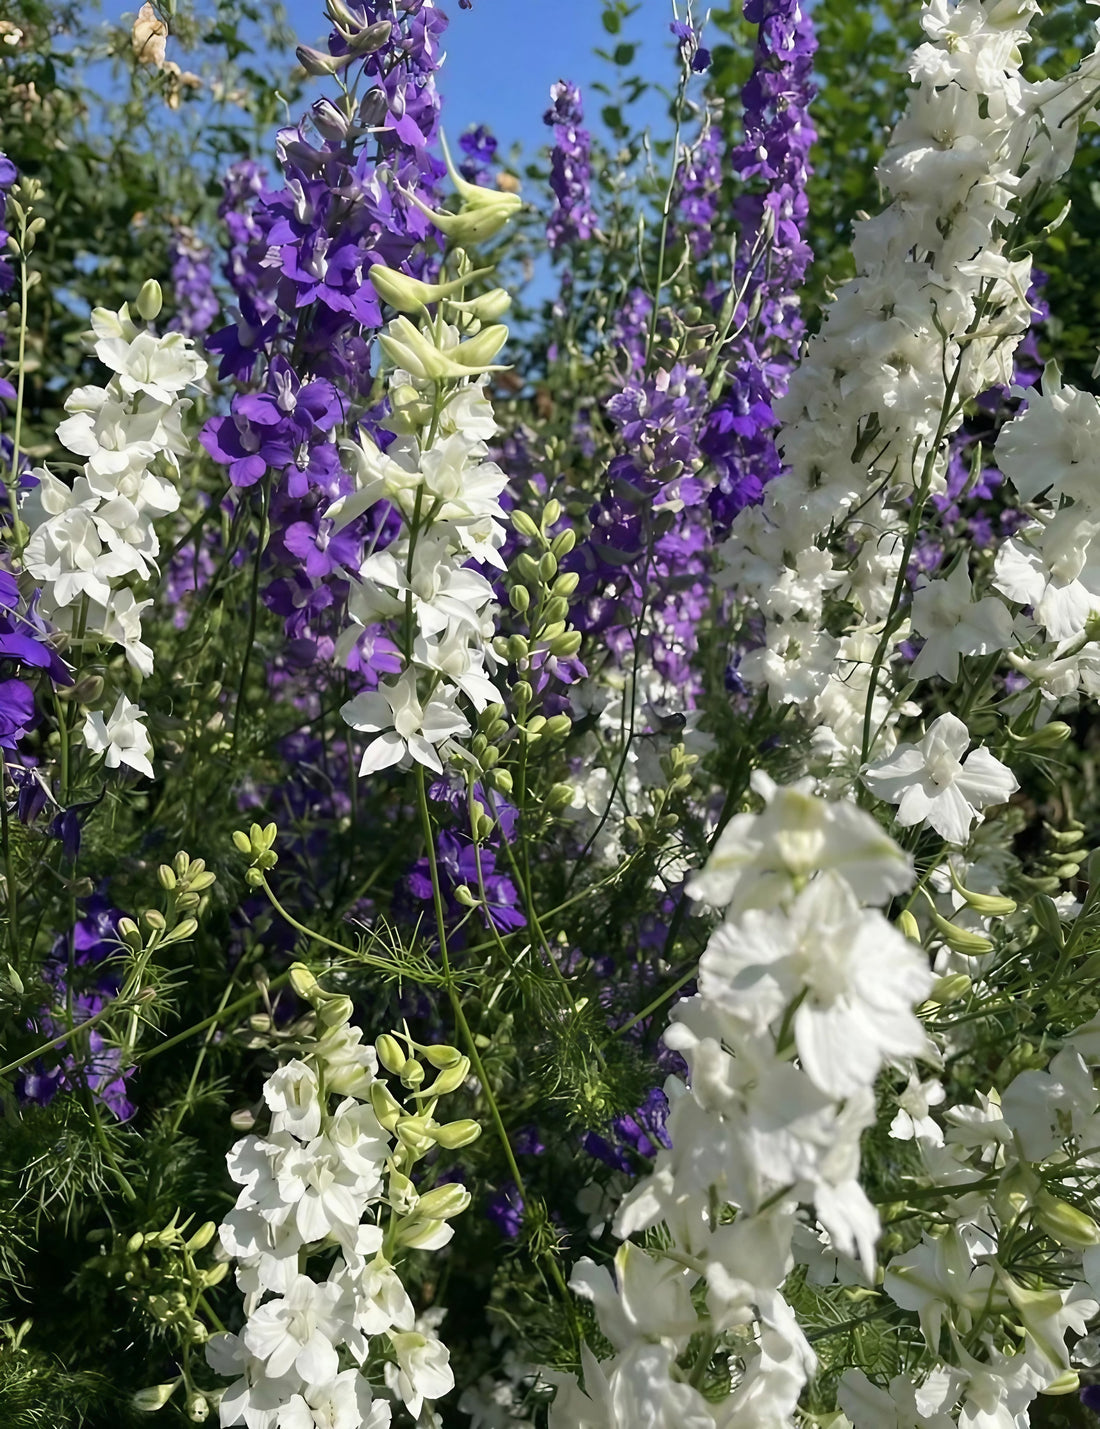 Larkspur Giant Imperial Mix blossoms flourishing in an outdoor setting